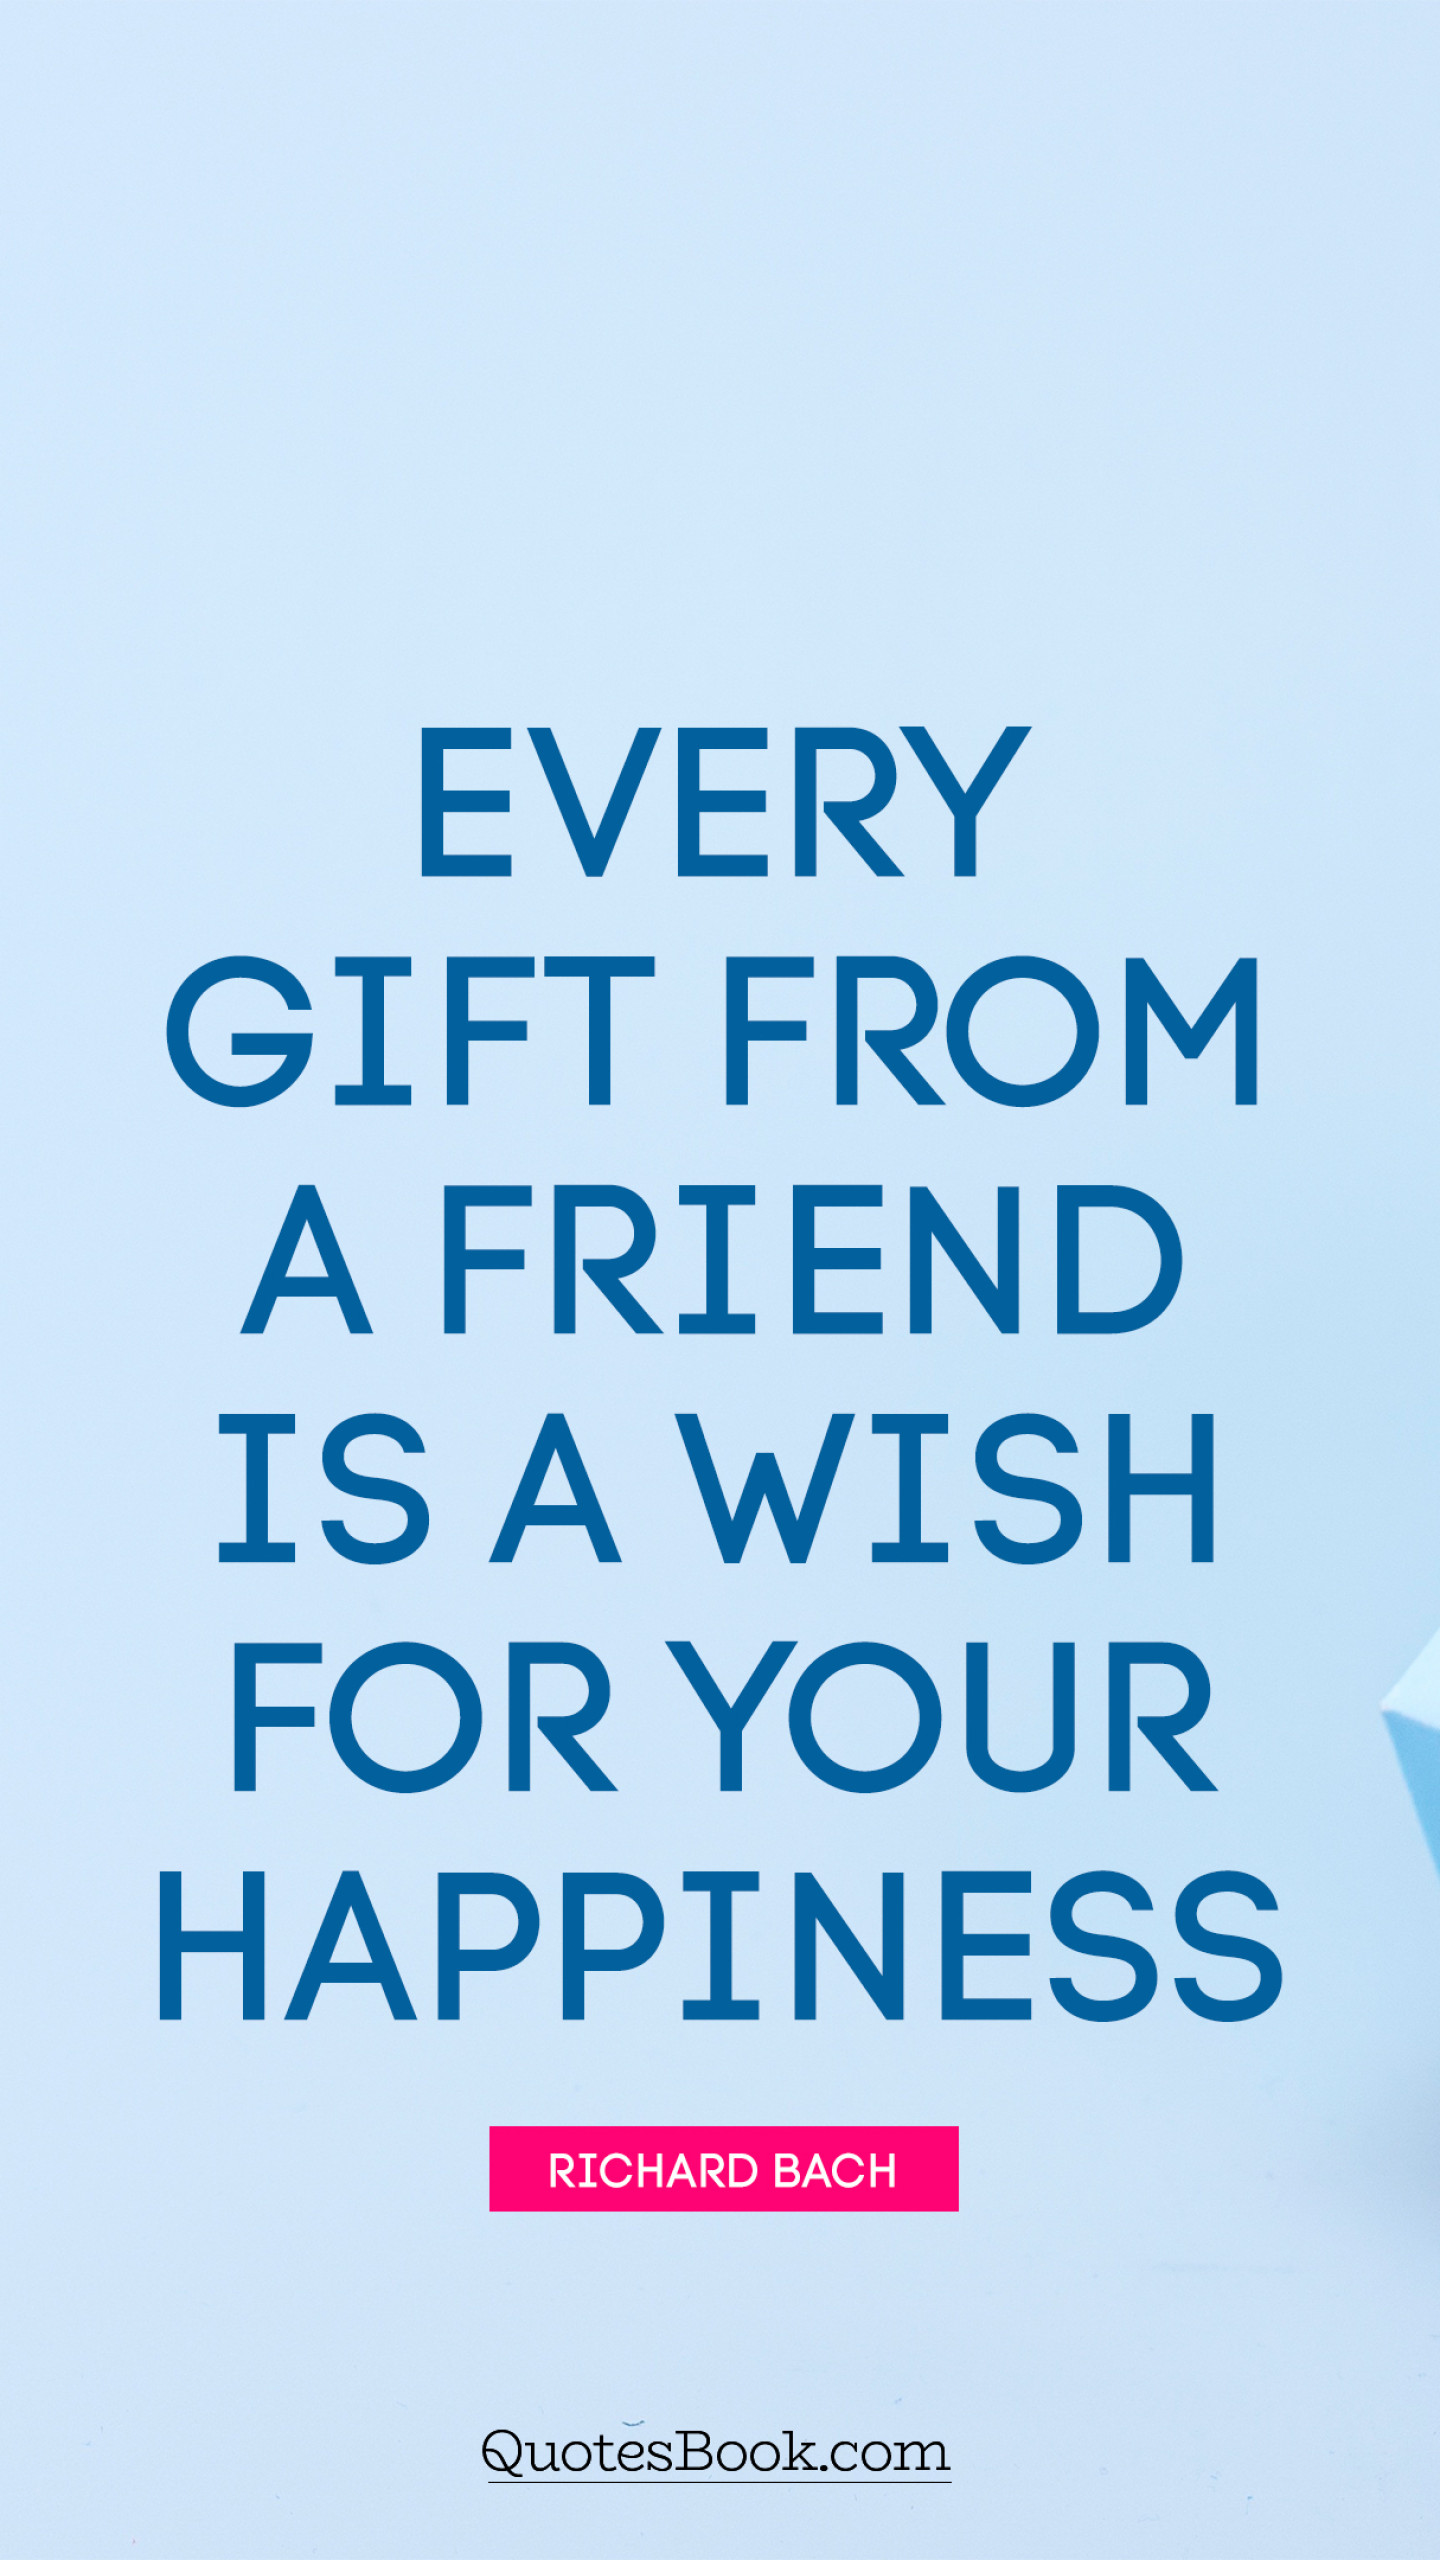 Every gift from a friend is a wish for your happiness. - Quote by